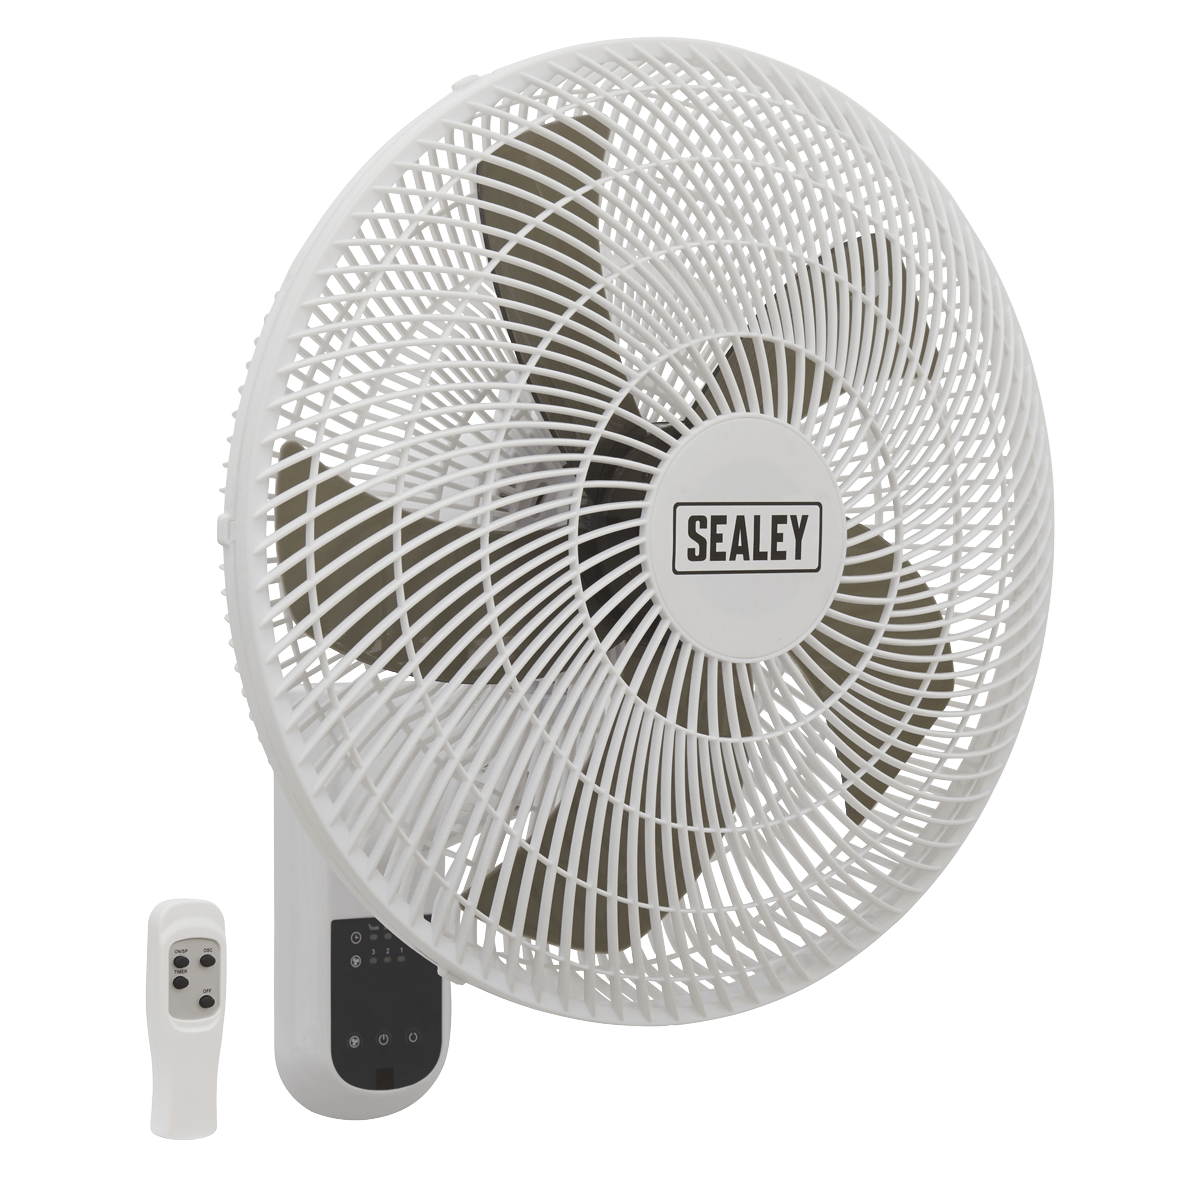 Sealey Wall Fan 3-Speed 16″ with Remote Control 230V